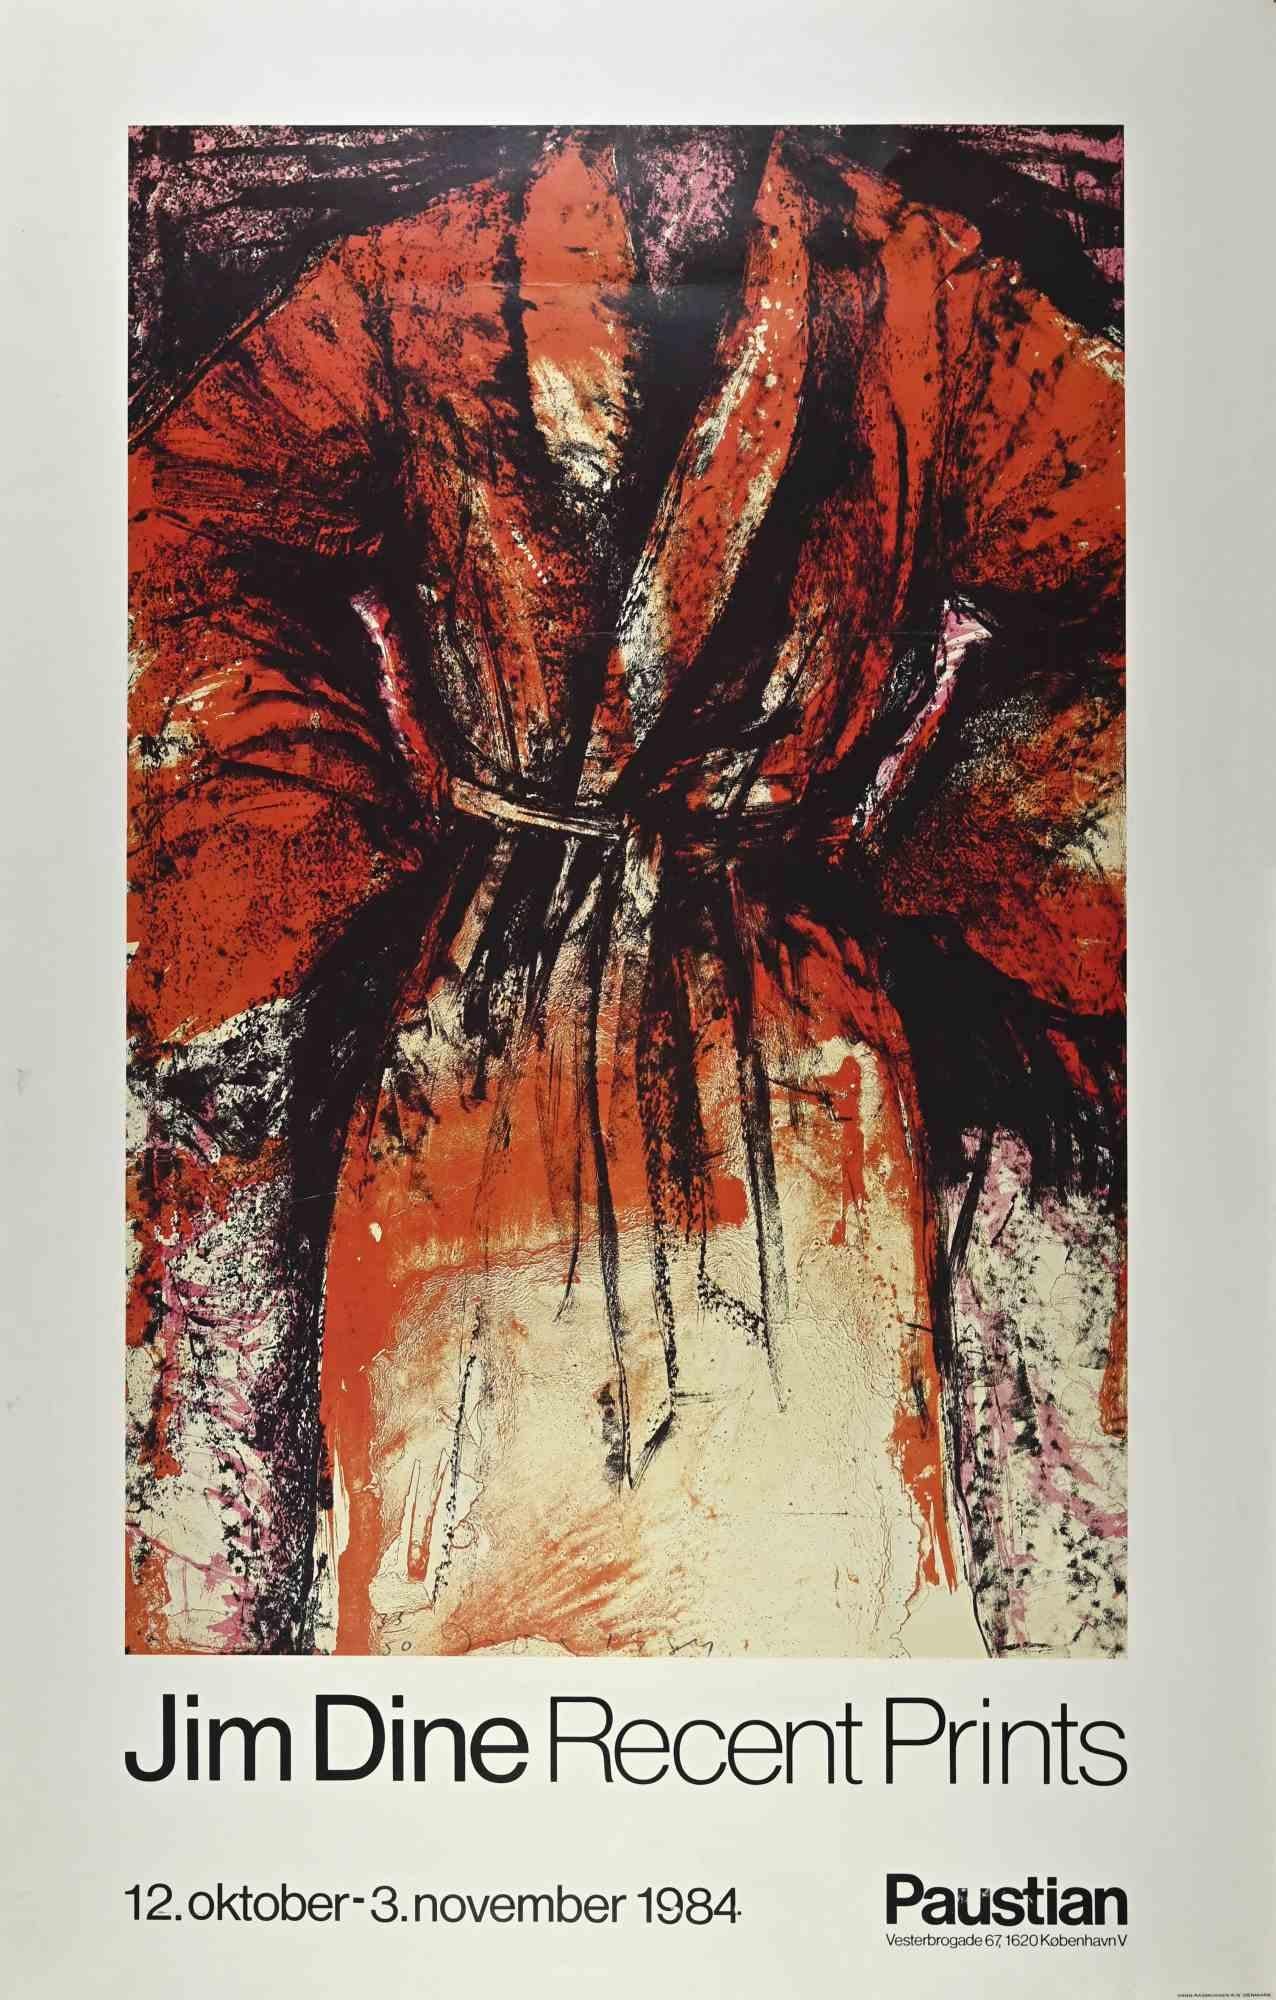 Jim Dine Recents Prints is an artwork realized in 1984, in occasion of a Jim's Dine exhibition. 

12 oktober - 3 november 1984.

Offset colored poster. 

h 125 x 80 cm.

Good conditions

